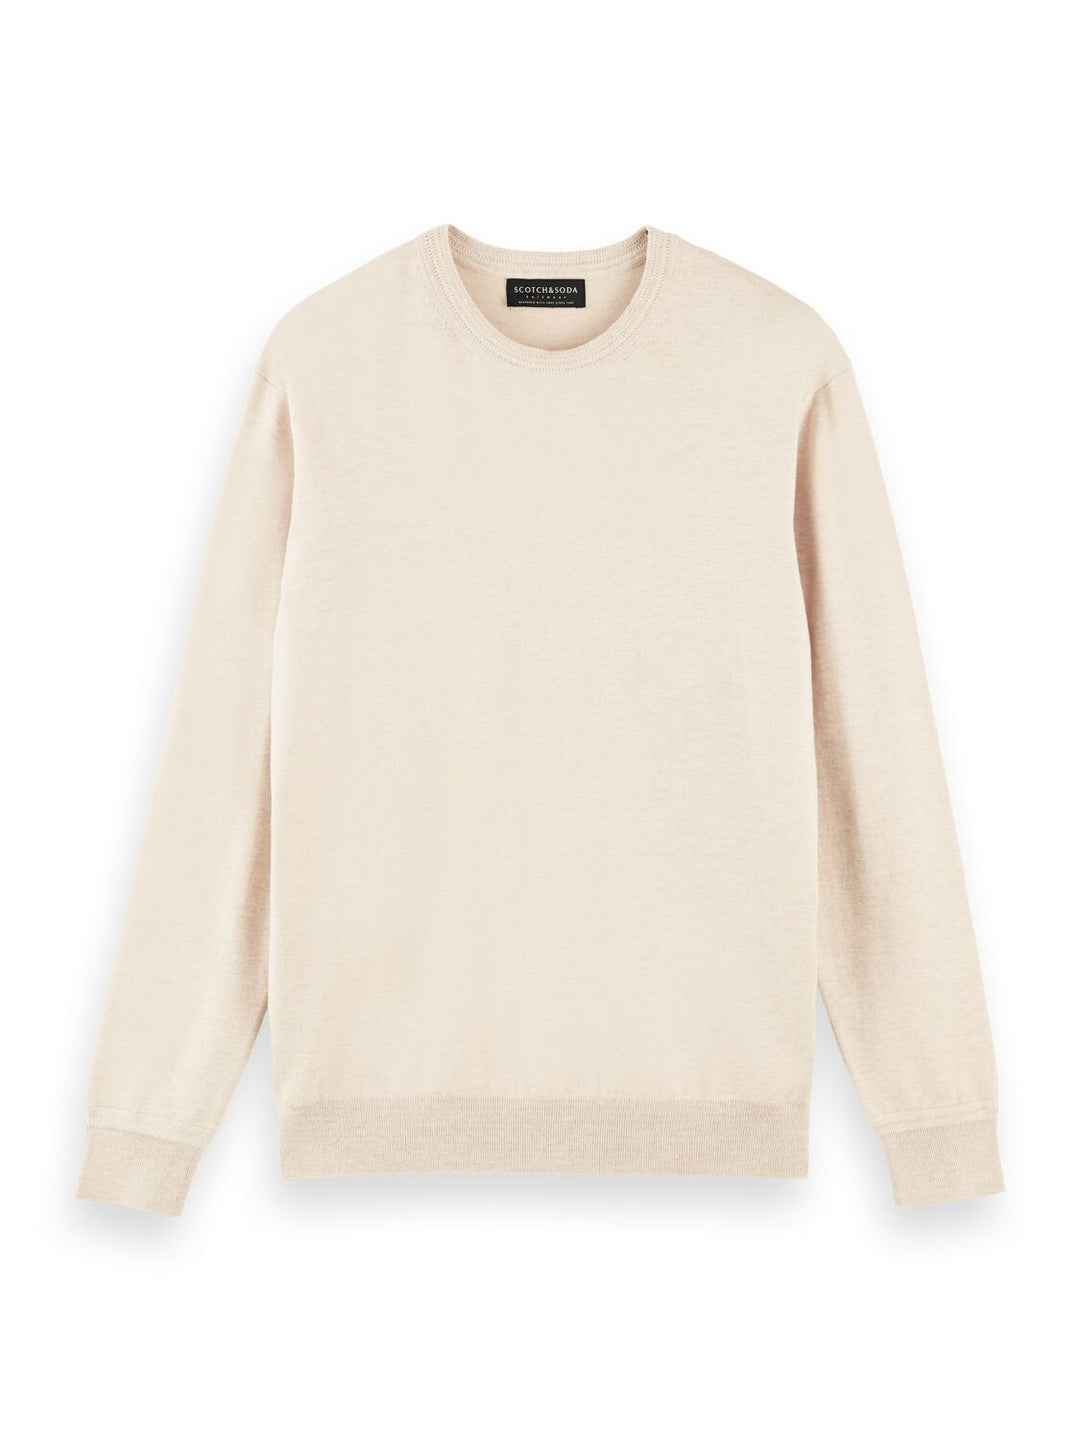 Classic Ecovera Crewneck Sweater in Pink Horizon Melange | Buster McGee